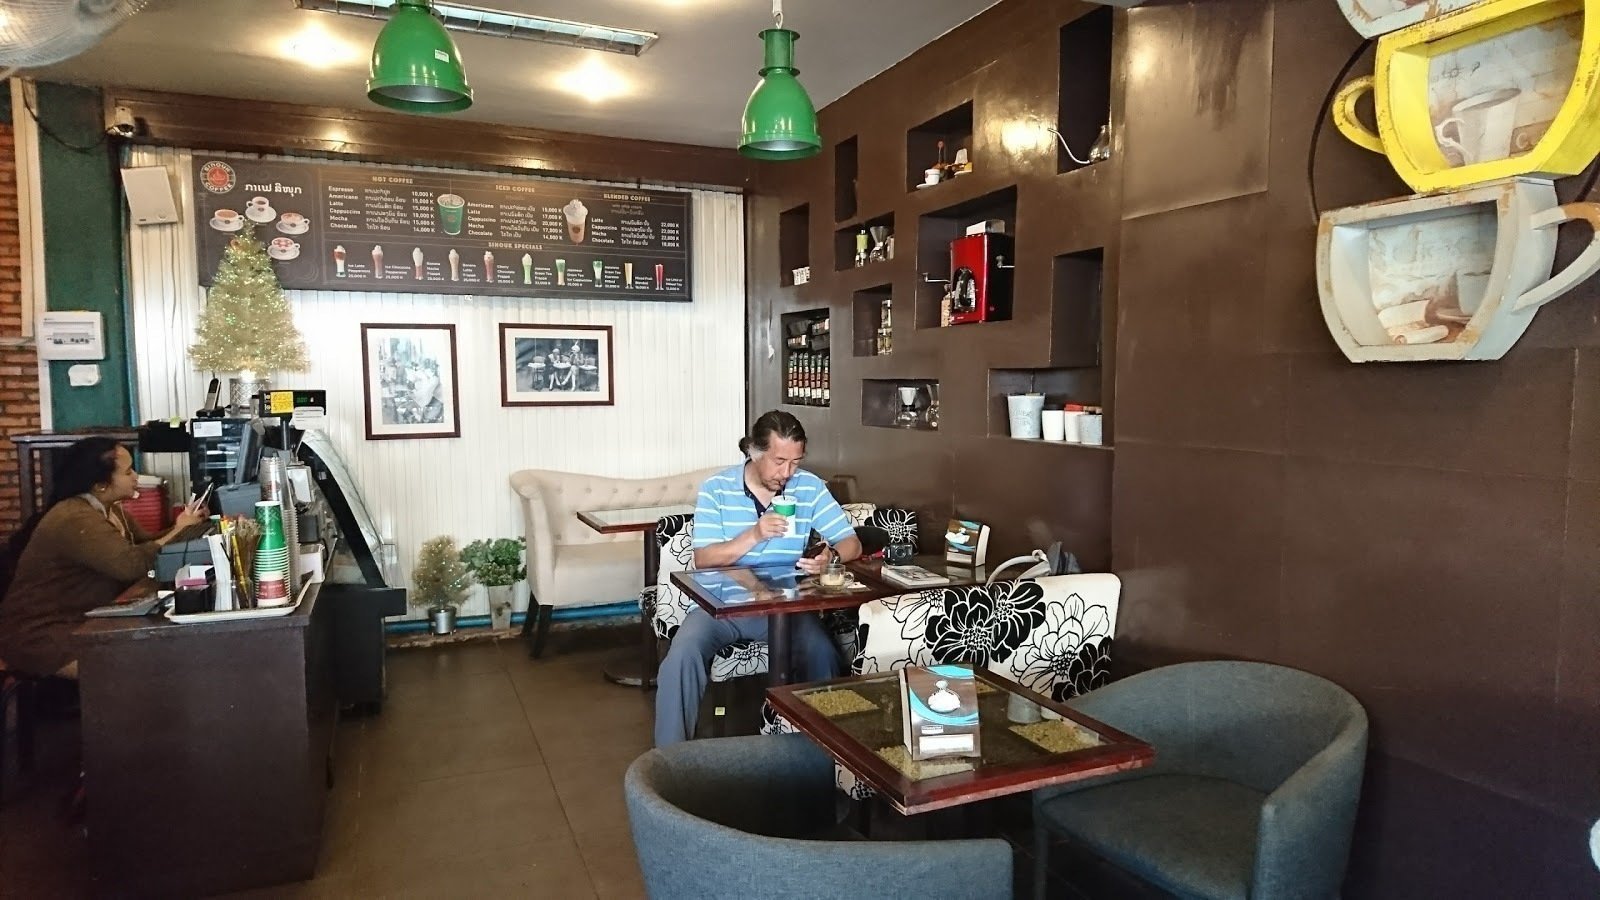 <span class="translation_missing" title="translation missing: en.meta.location_title, location_name: Cafe Sinouk @ Chao Anou Road, city: Vientiane">Location Title</span>